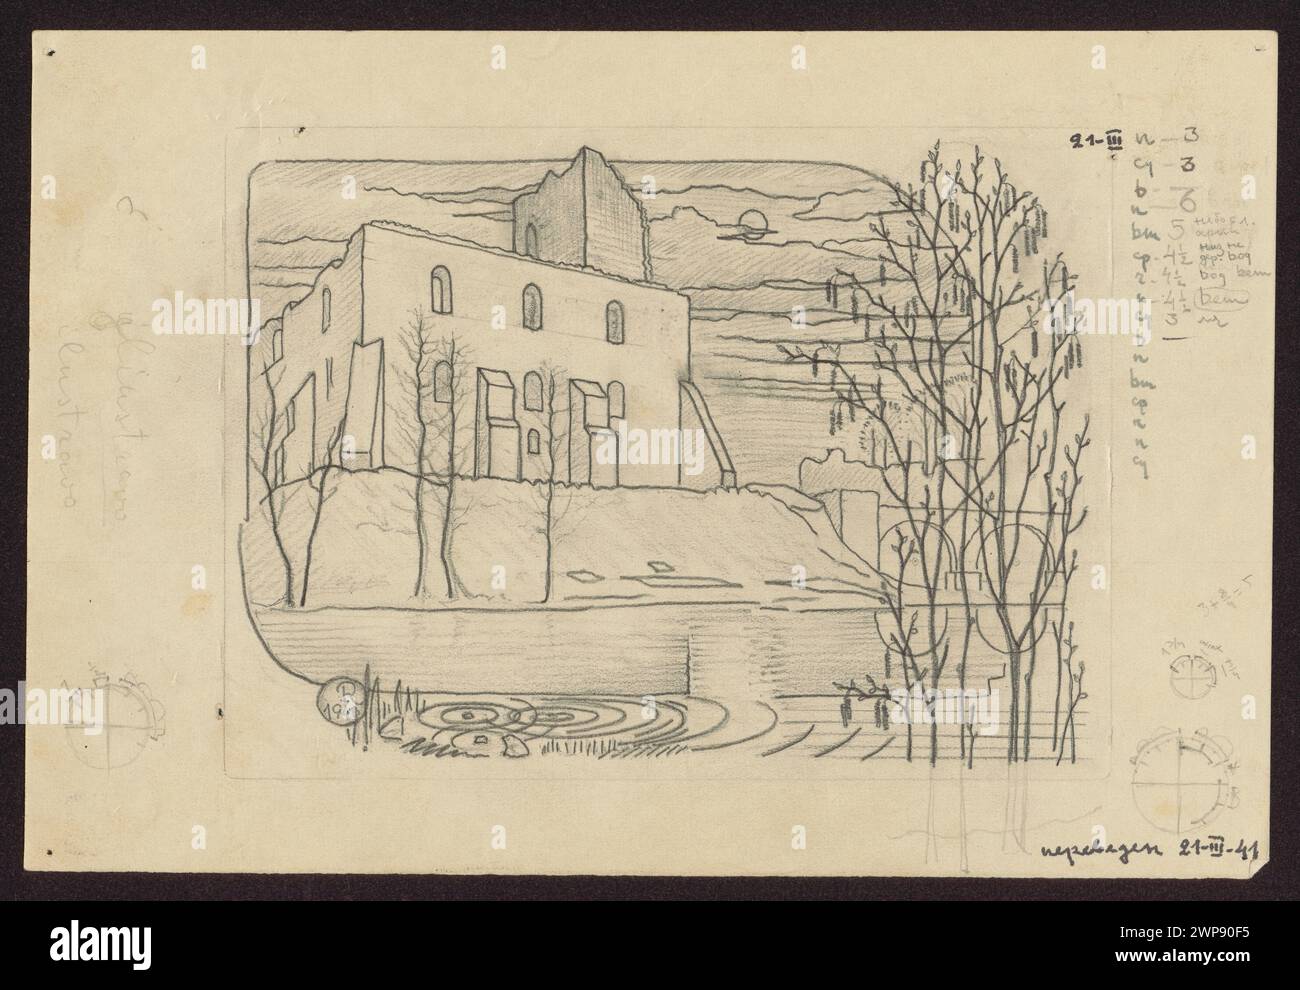 Ruins of the prince, sketches for graphics from the TRAKI series; Romanowicz, Walenty; 1941-1944 (1941-00-00-1944-00-00); Stock Photo